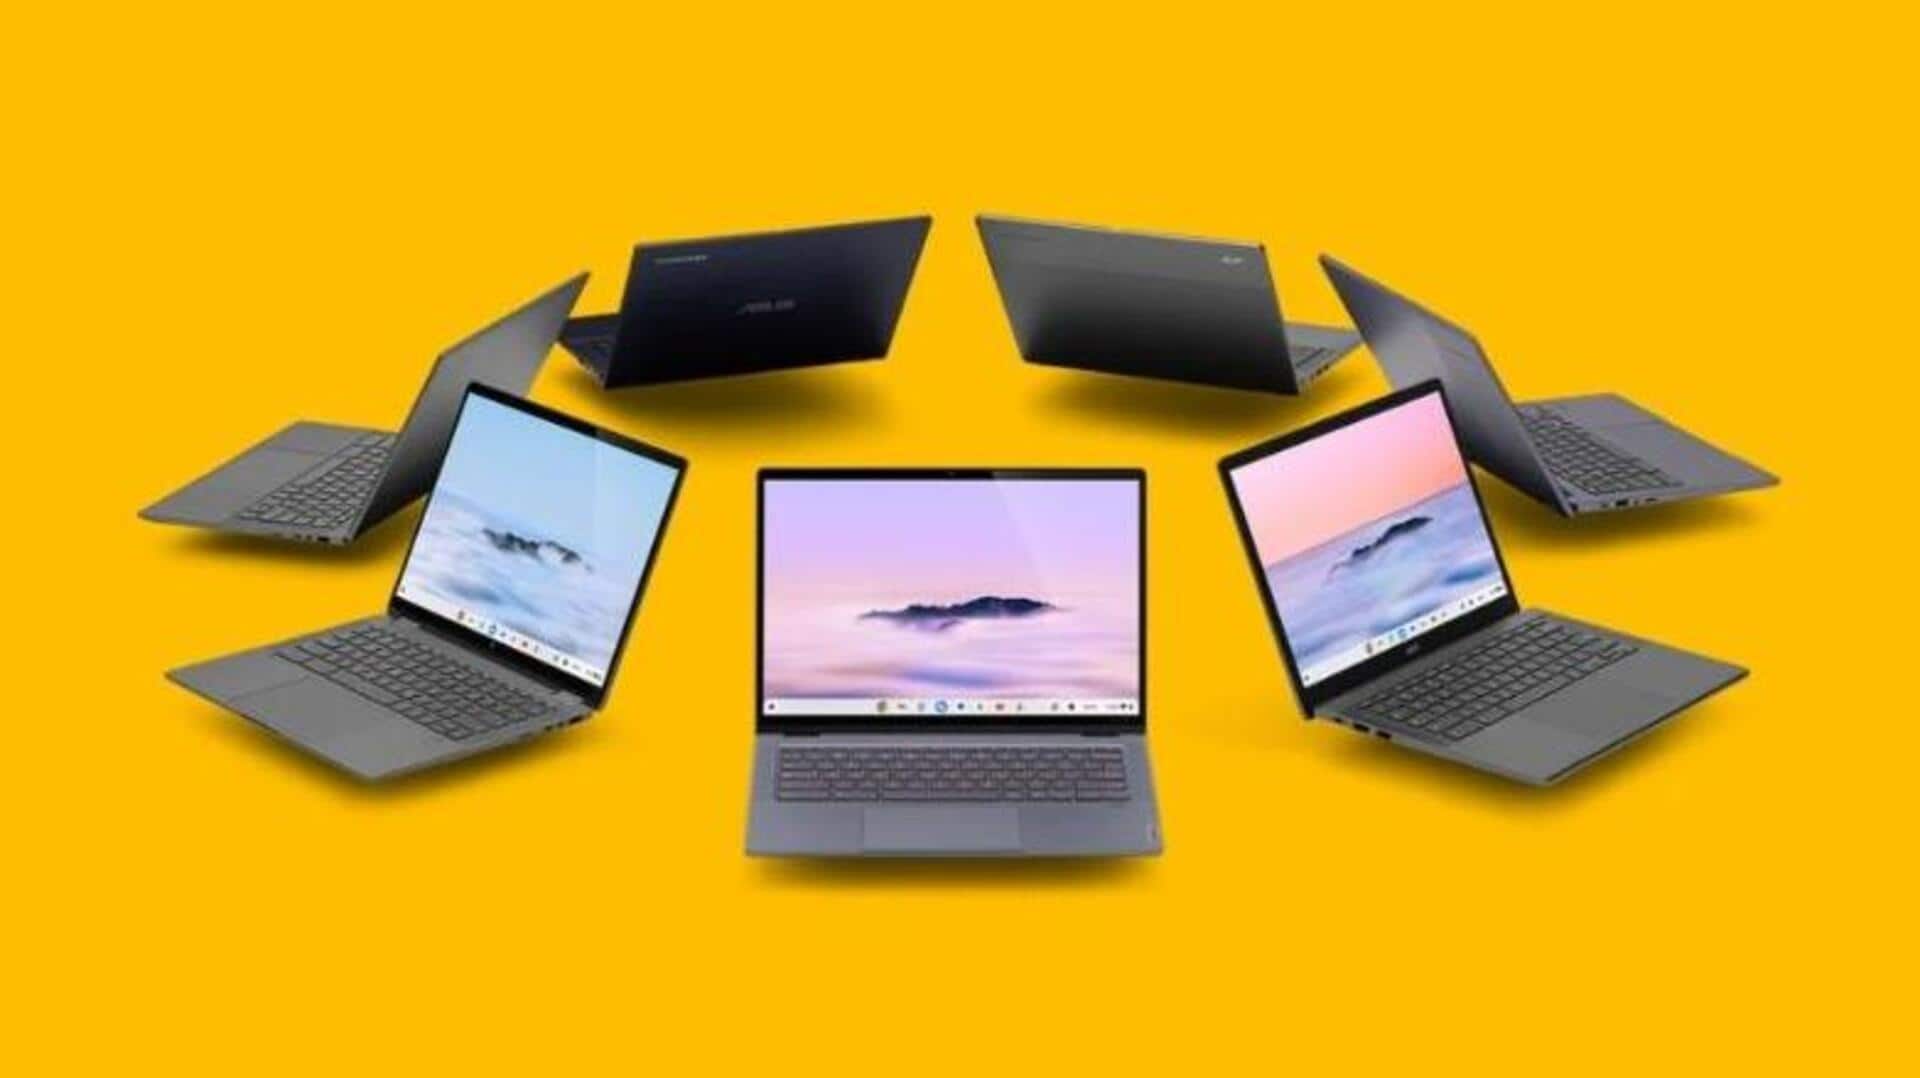 Google's Chromebook Plus laptops offer improved performance, new AI capabilities